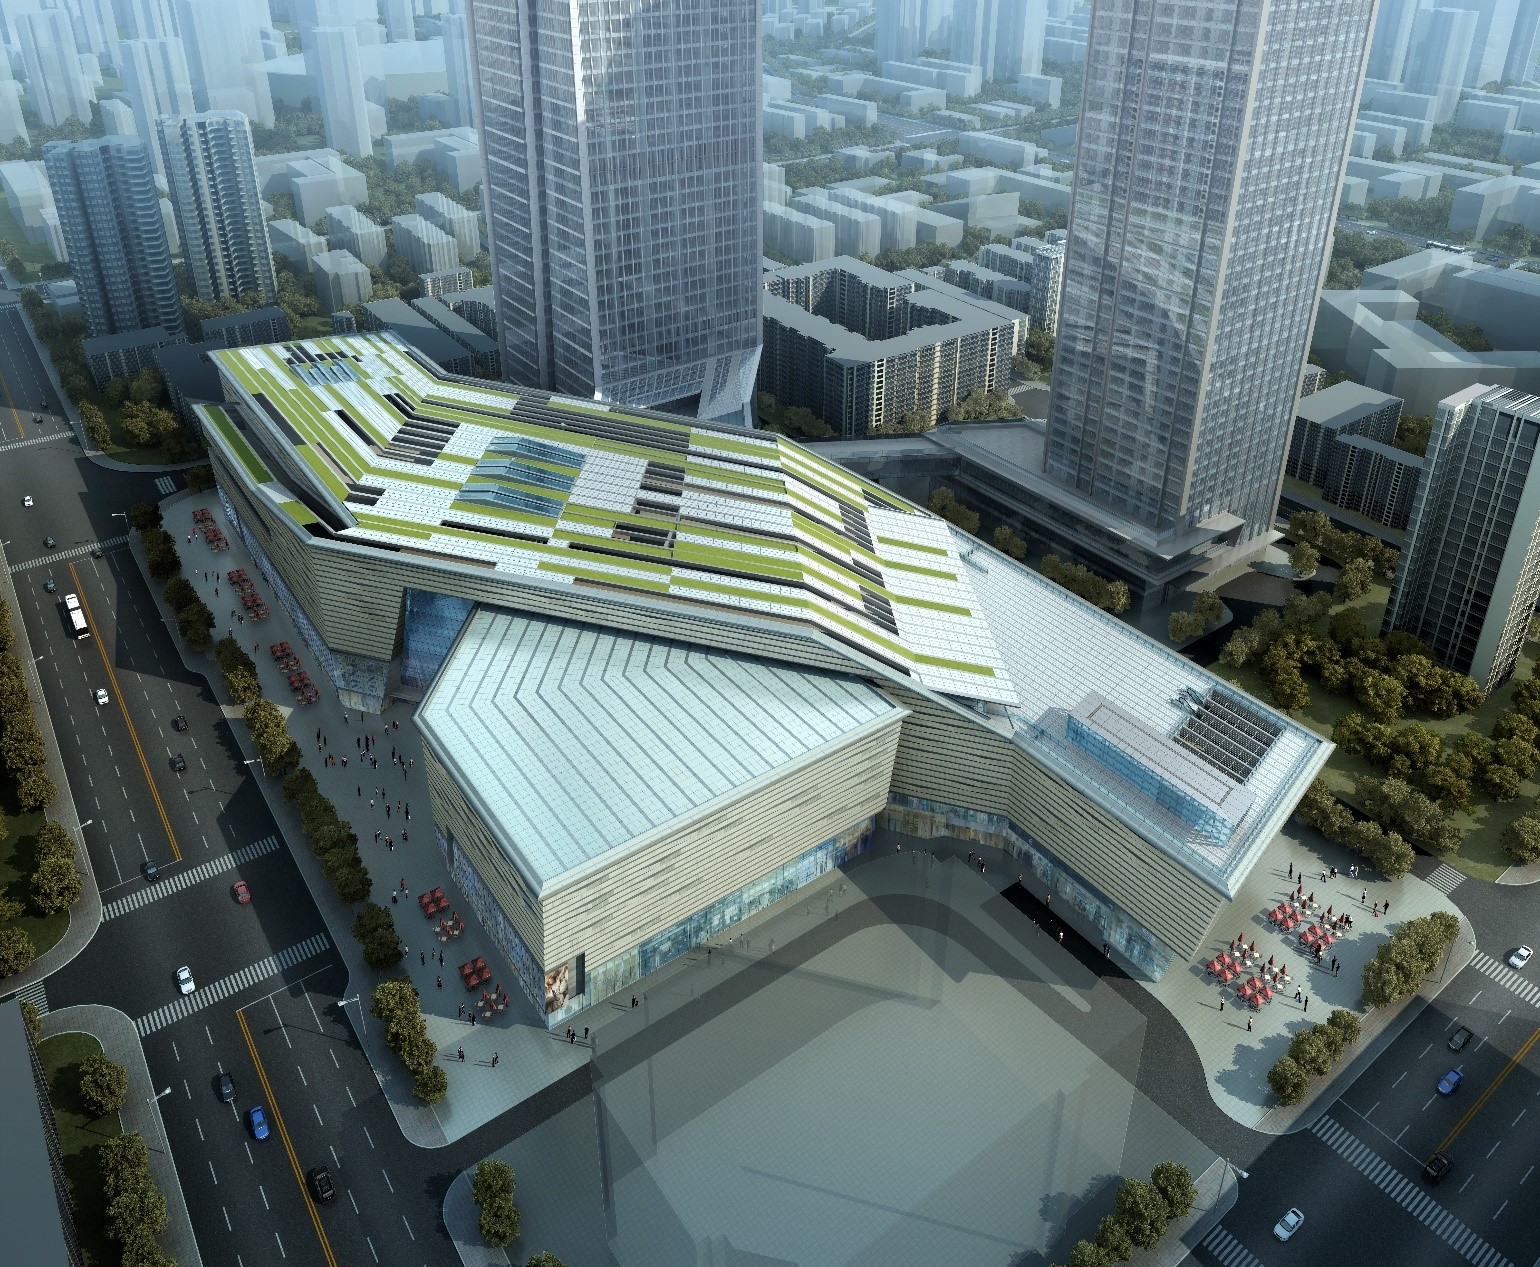 Performance Mockup Unit (PMU) of Kunming Hang Lung Plaza Project Passes the Tests by both Chinese and American Standard Methods